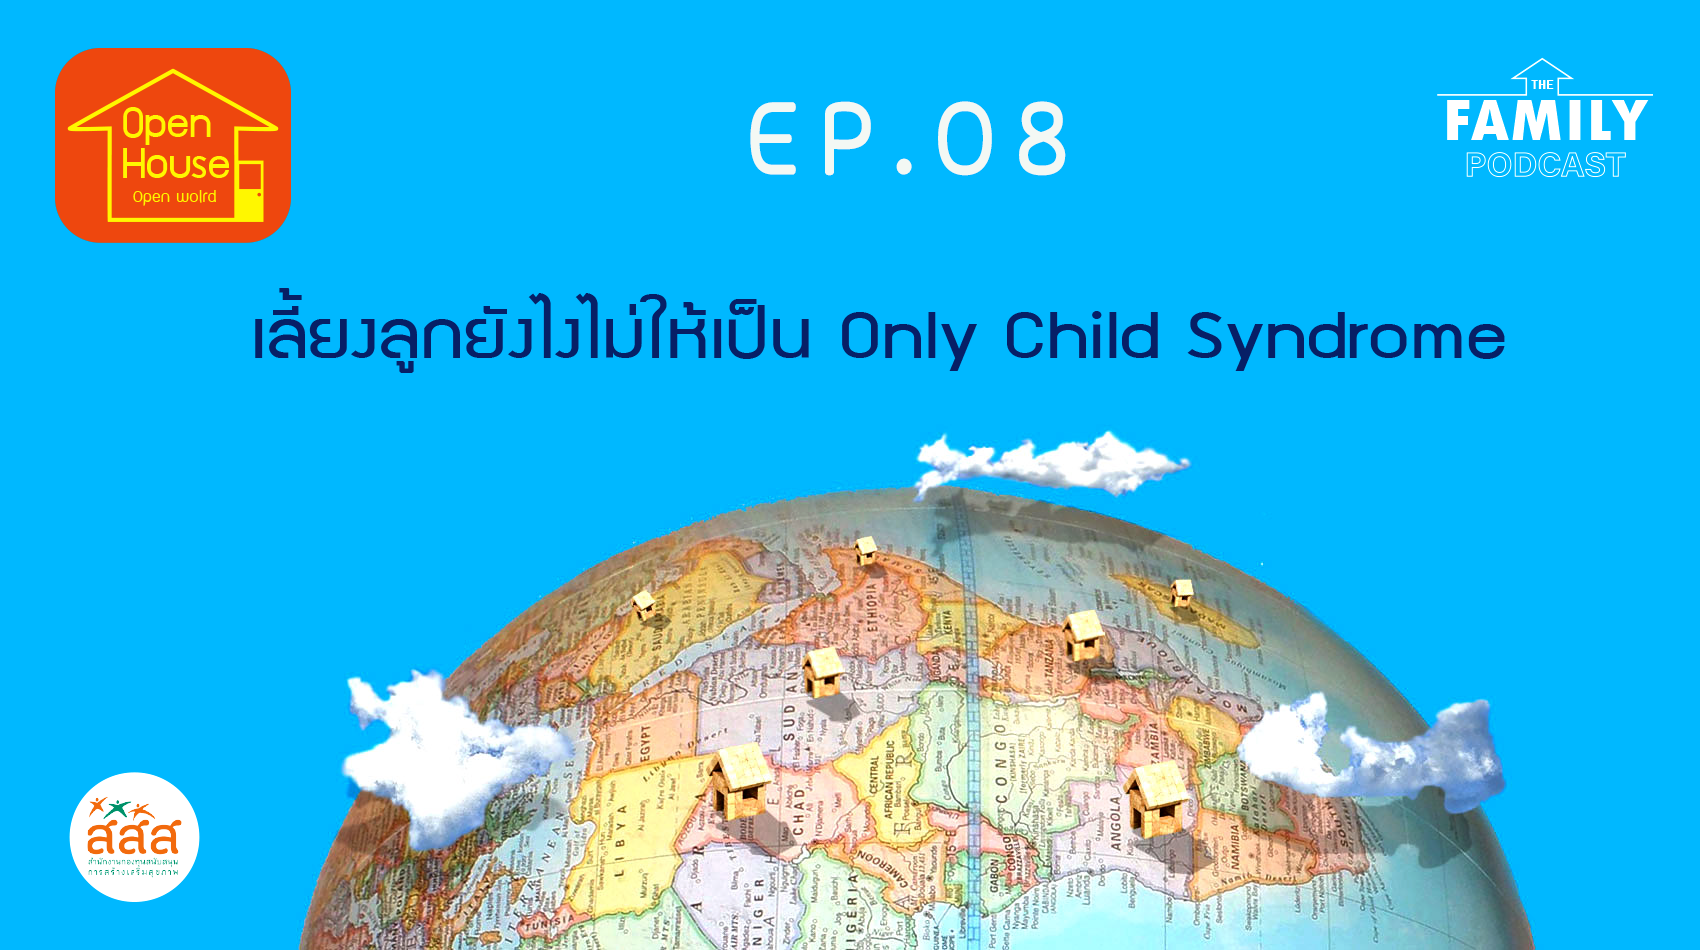 The Family Podcast Open house Open world EP.08 เลี้ยงลูกยังไงไม่ให้เป็น Only Child Syndrome